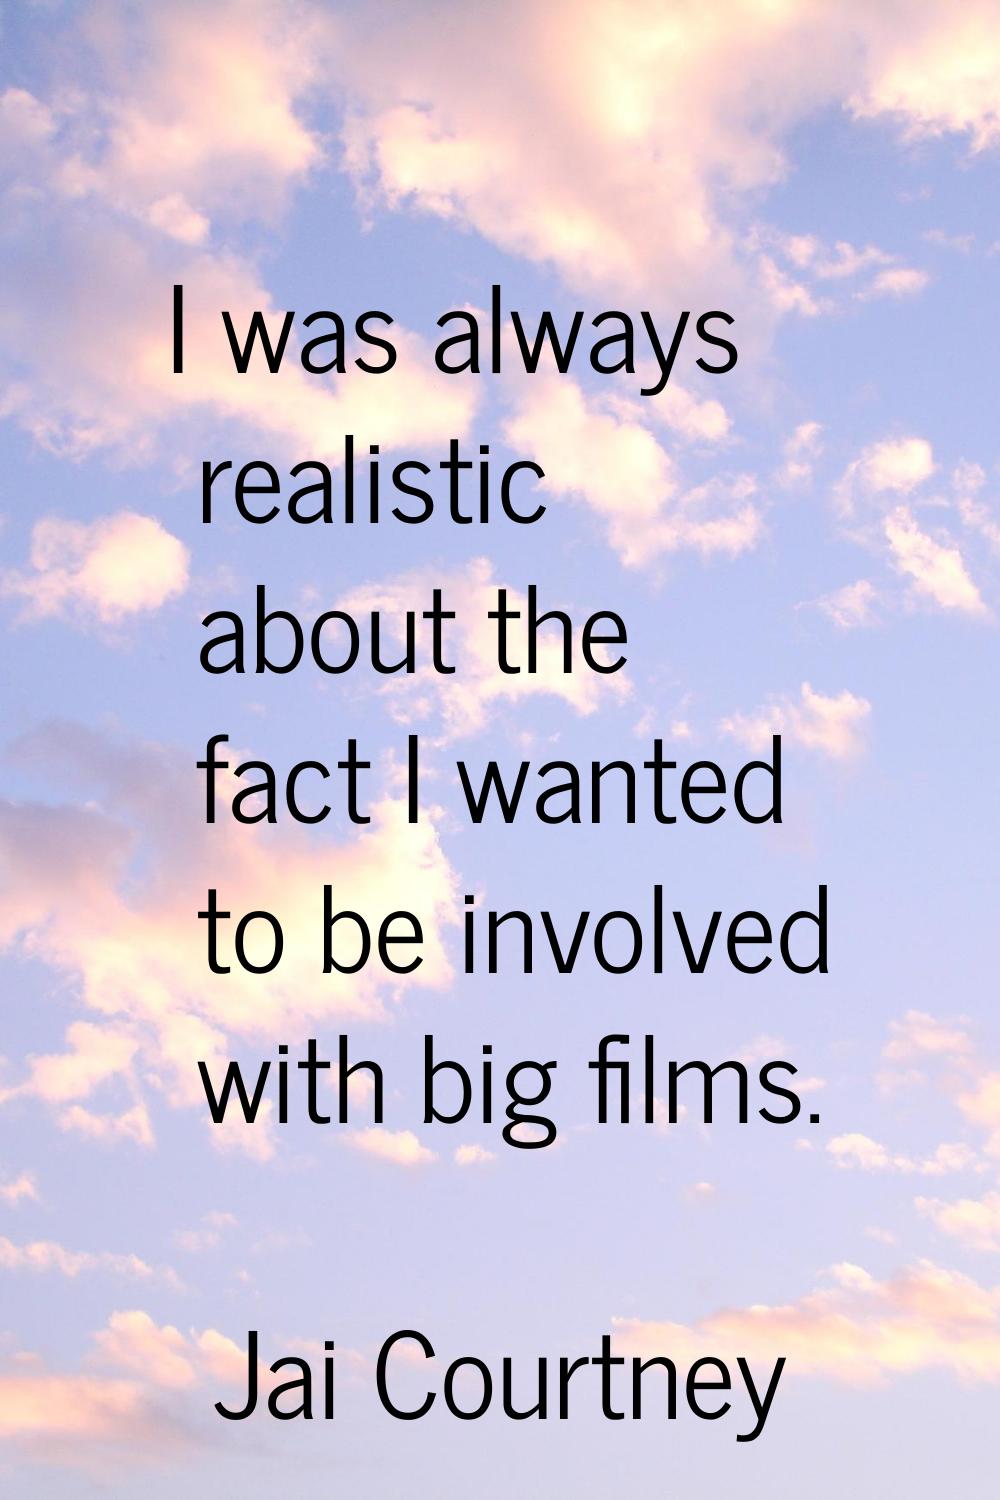 I was always realistic about the fact I wanted to be involved with big films.